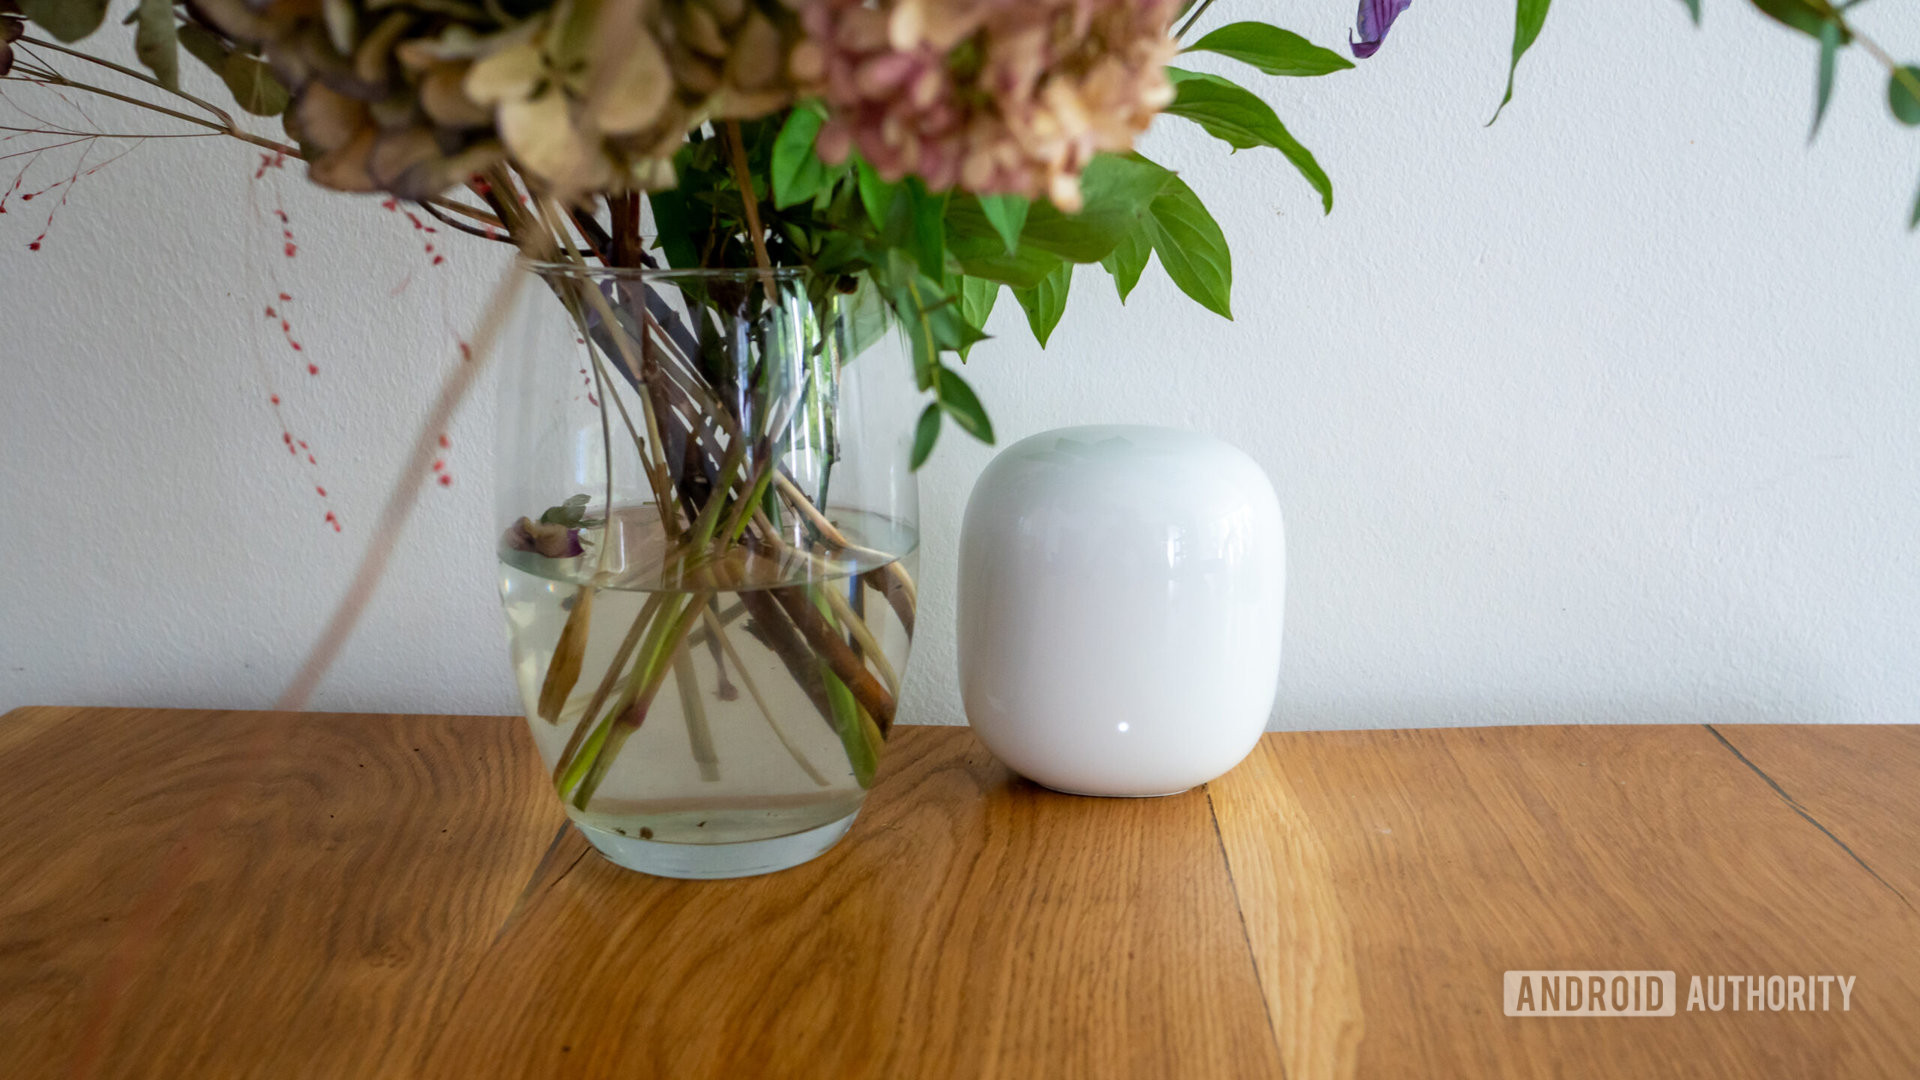 Google Nest Wi Fi Pro router front view on table next to flower vase